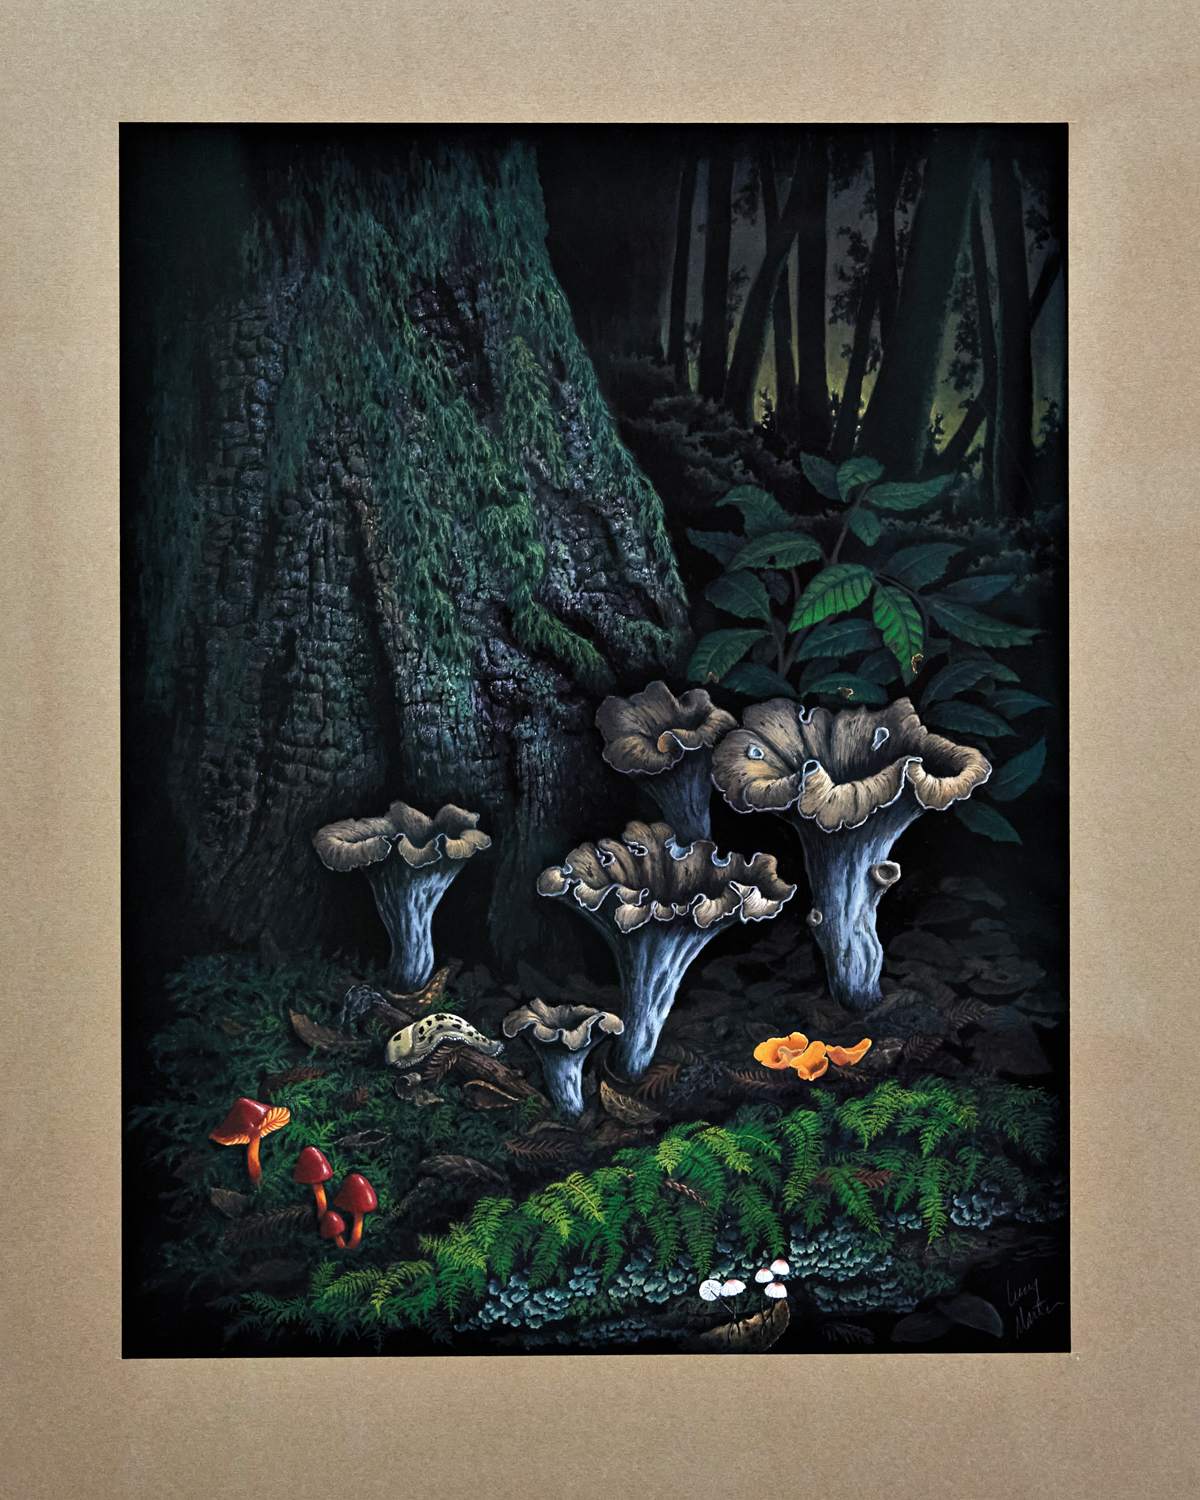 A painting depicts mushrooms.